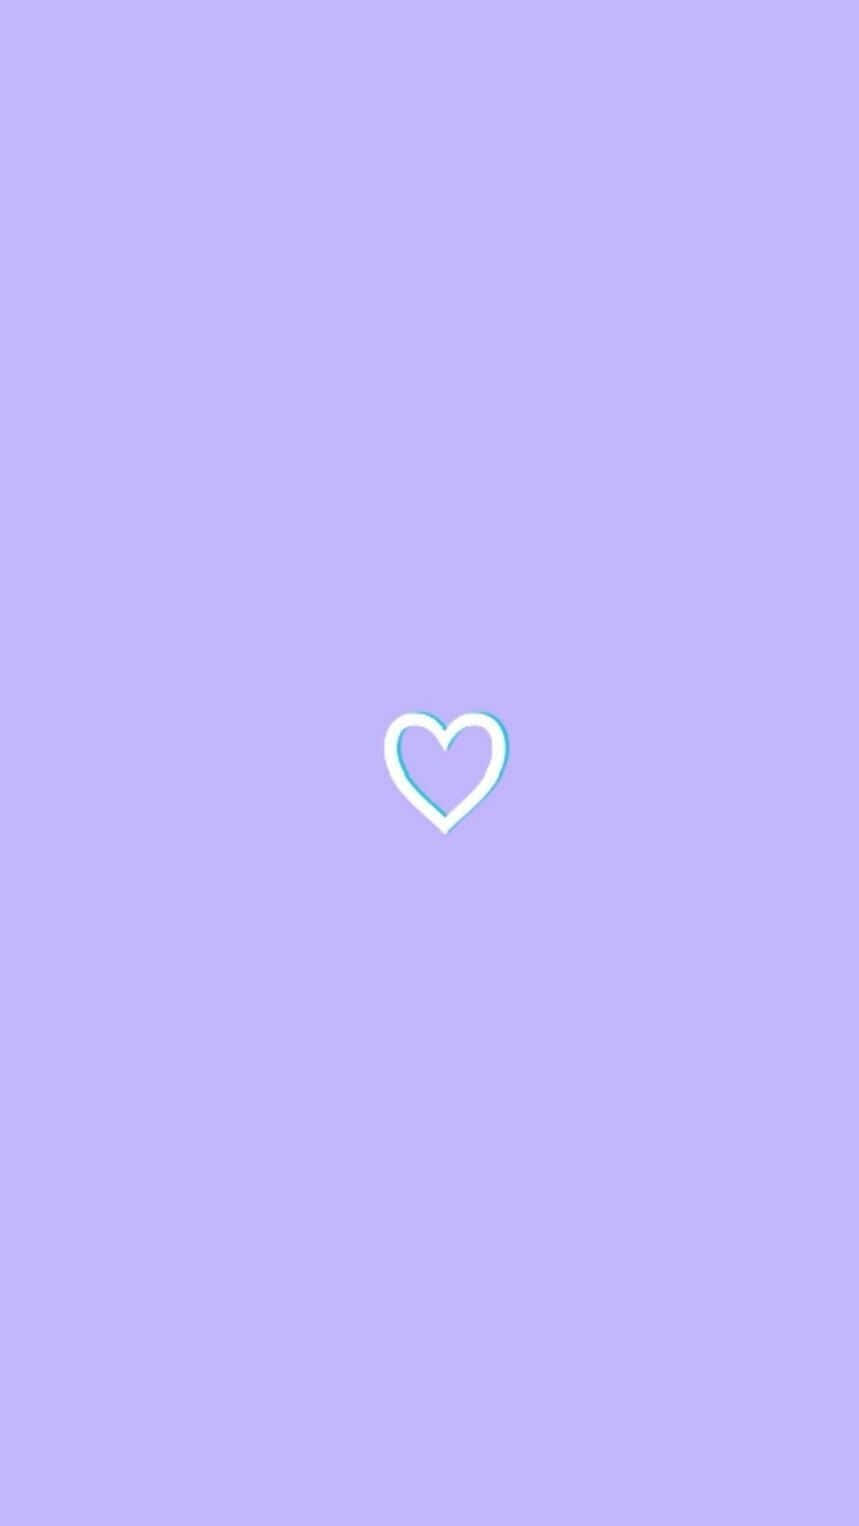 A purple background featuring a heart-shaped texture gives off a cute and loving atmosphere.